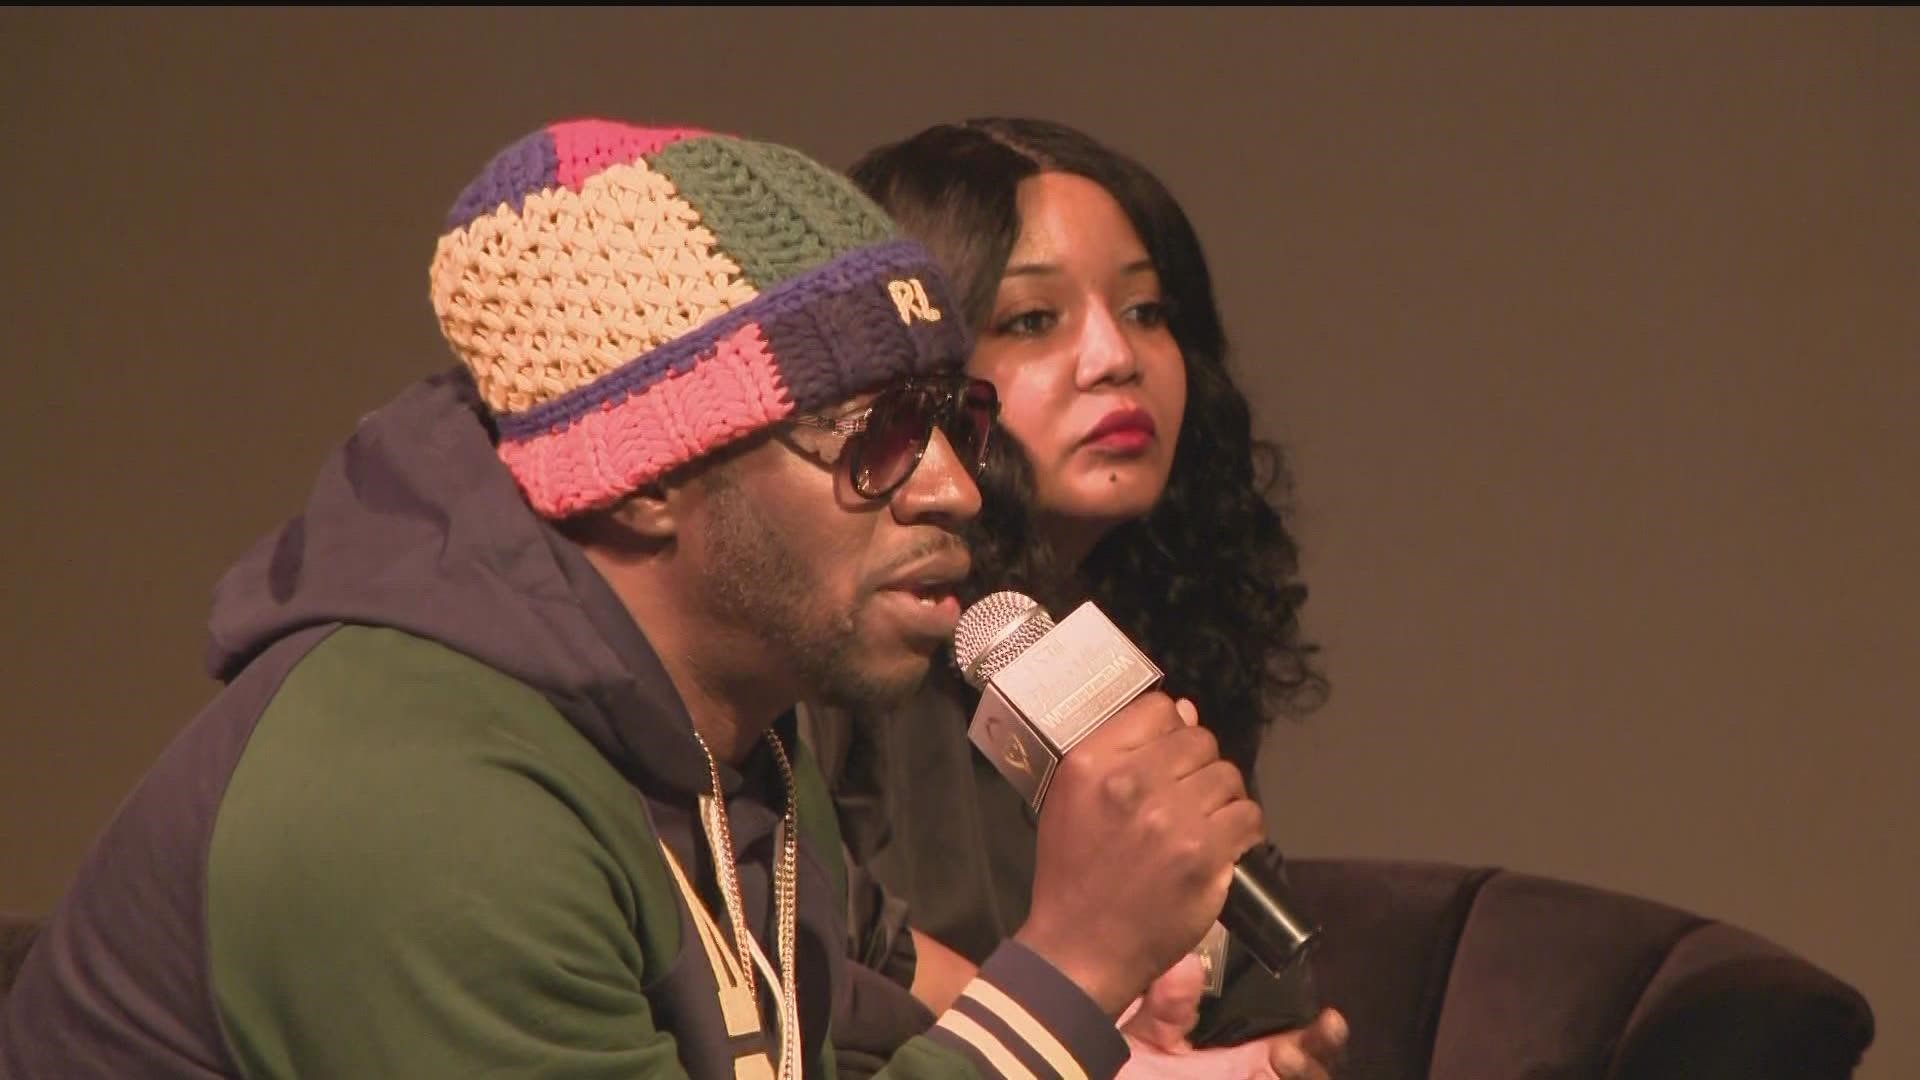 After several teens have been shot and killed, the community gathered to discuss solutions.